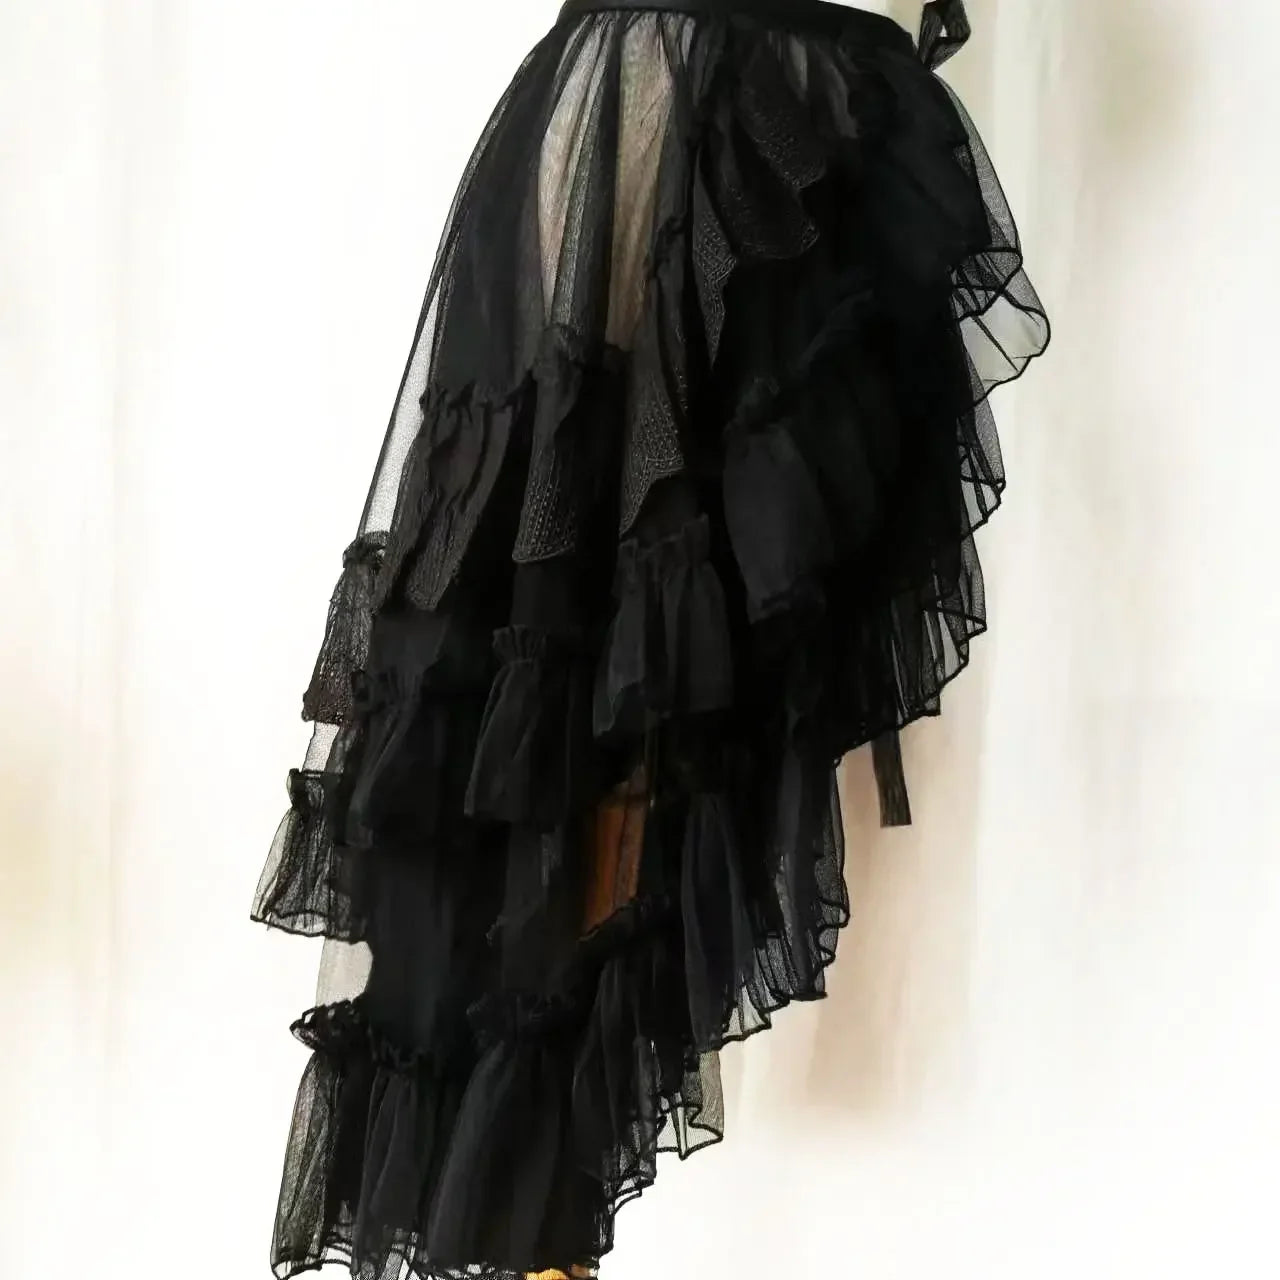 Double-Layered Waist Curtain Skirt - Asymmetrical Ruffle High-Low Cover-Up - Black / M / 60cm - Bottoms - Skirts - 9